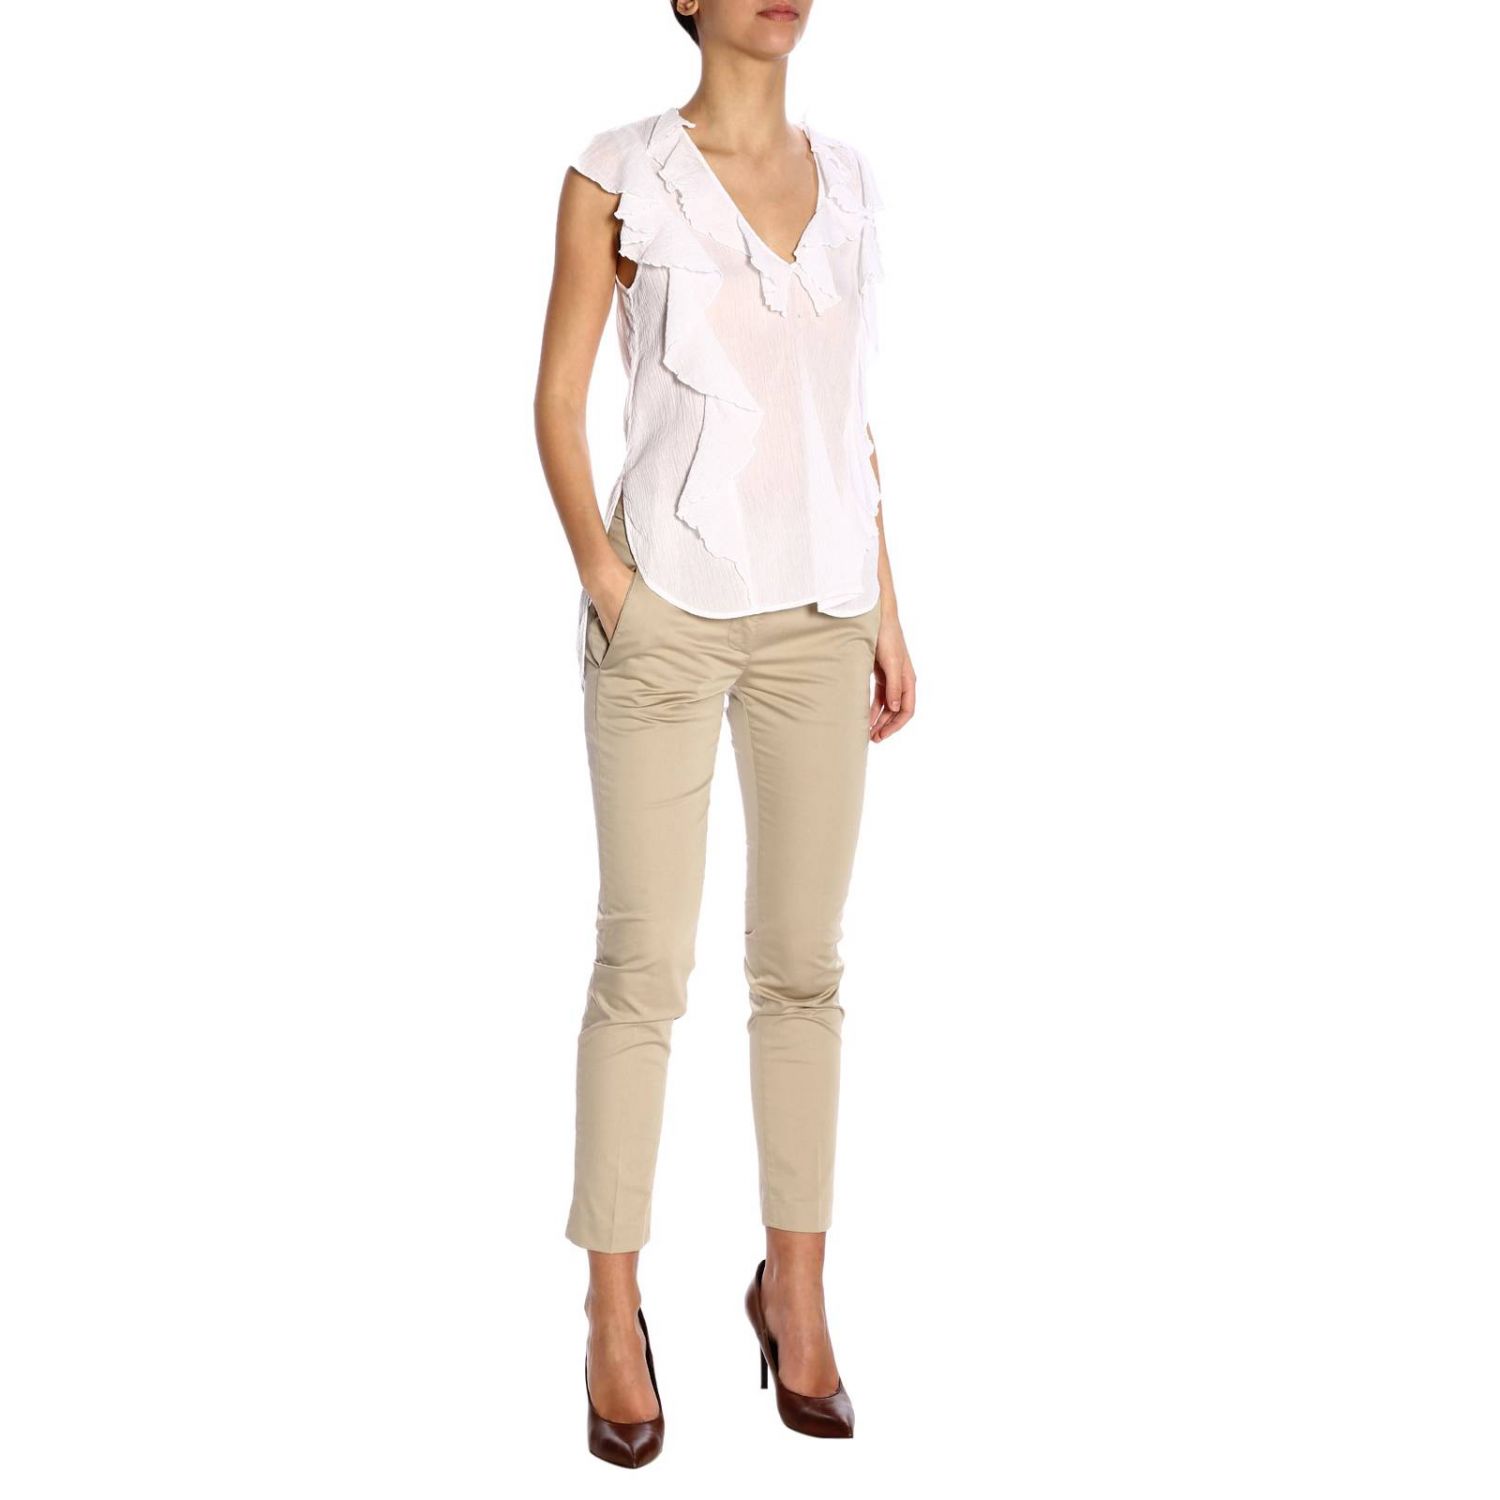 Dondup Outlet: top for woman - White | Dondup top DC042 CF0153 online ...